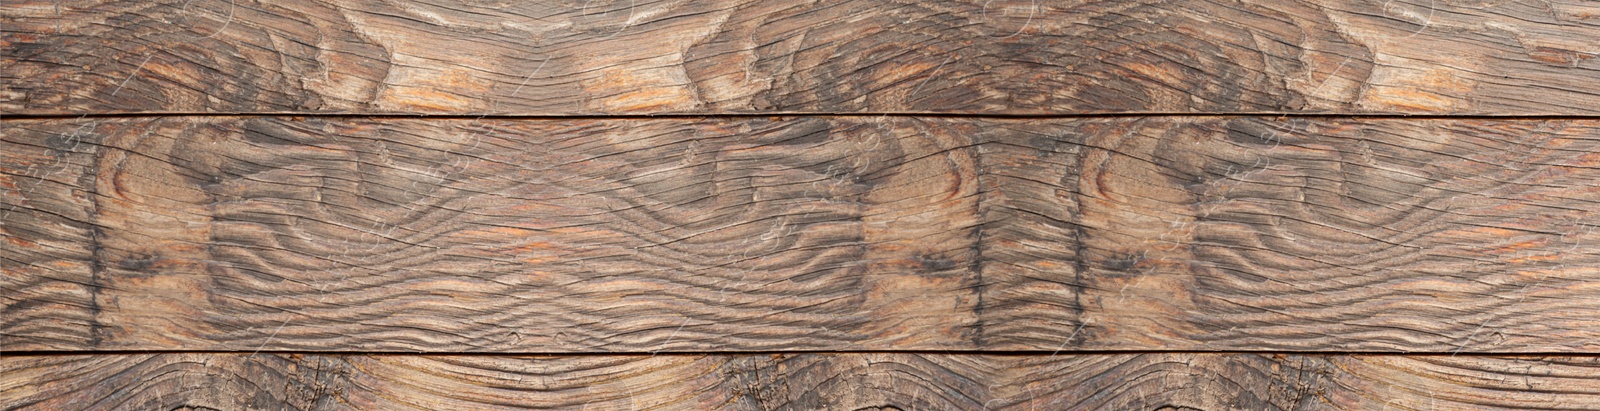 Image of Texture of wooden surface as background. Banner design